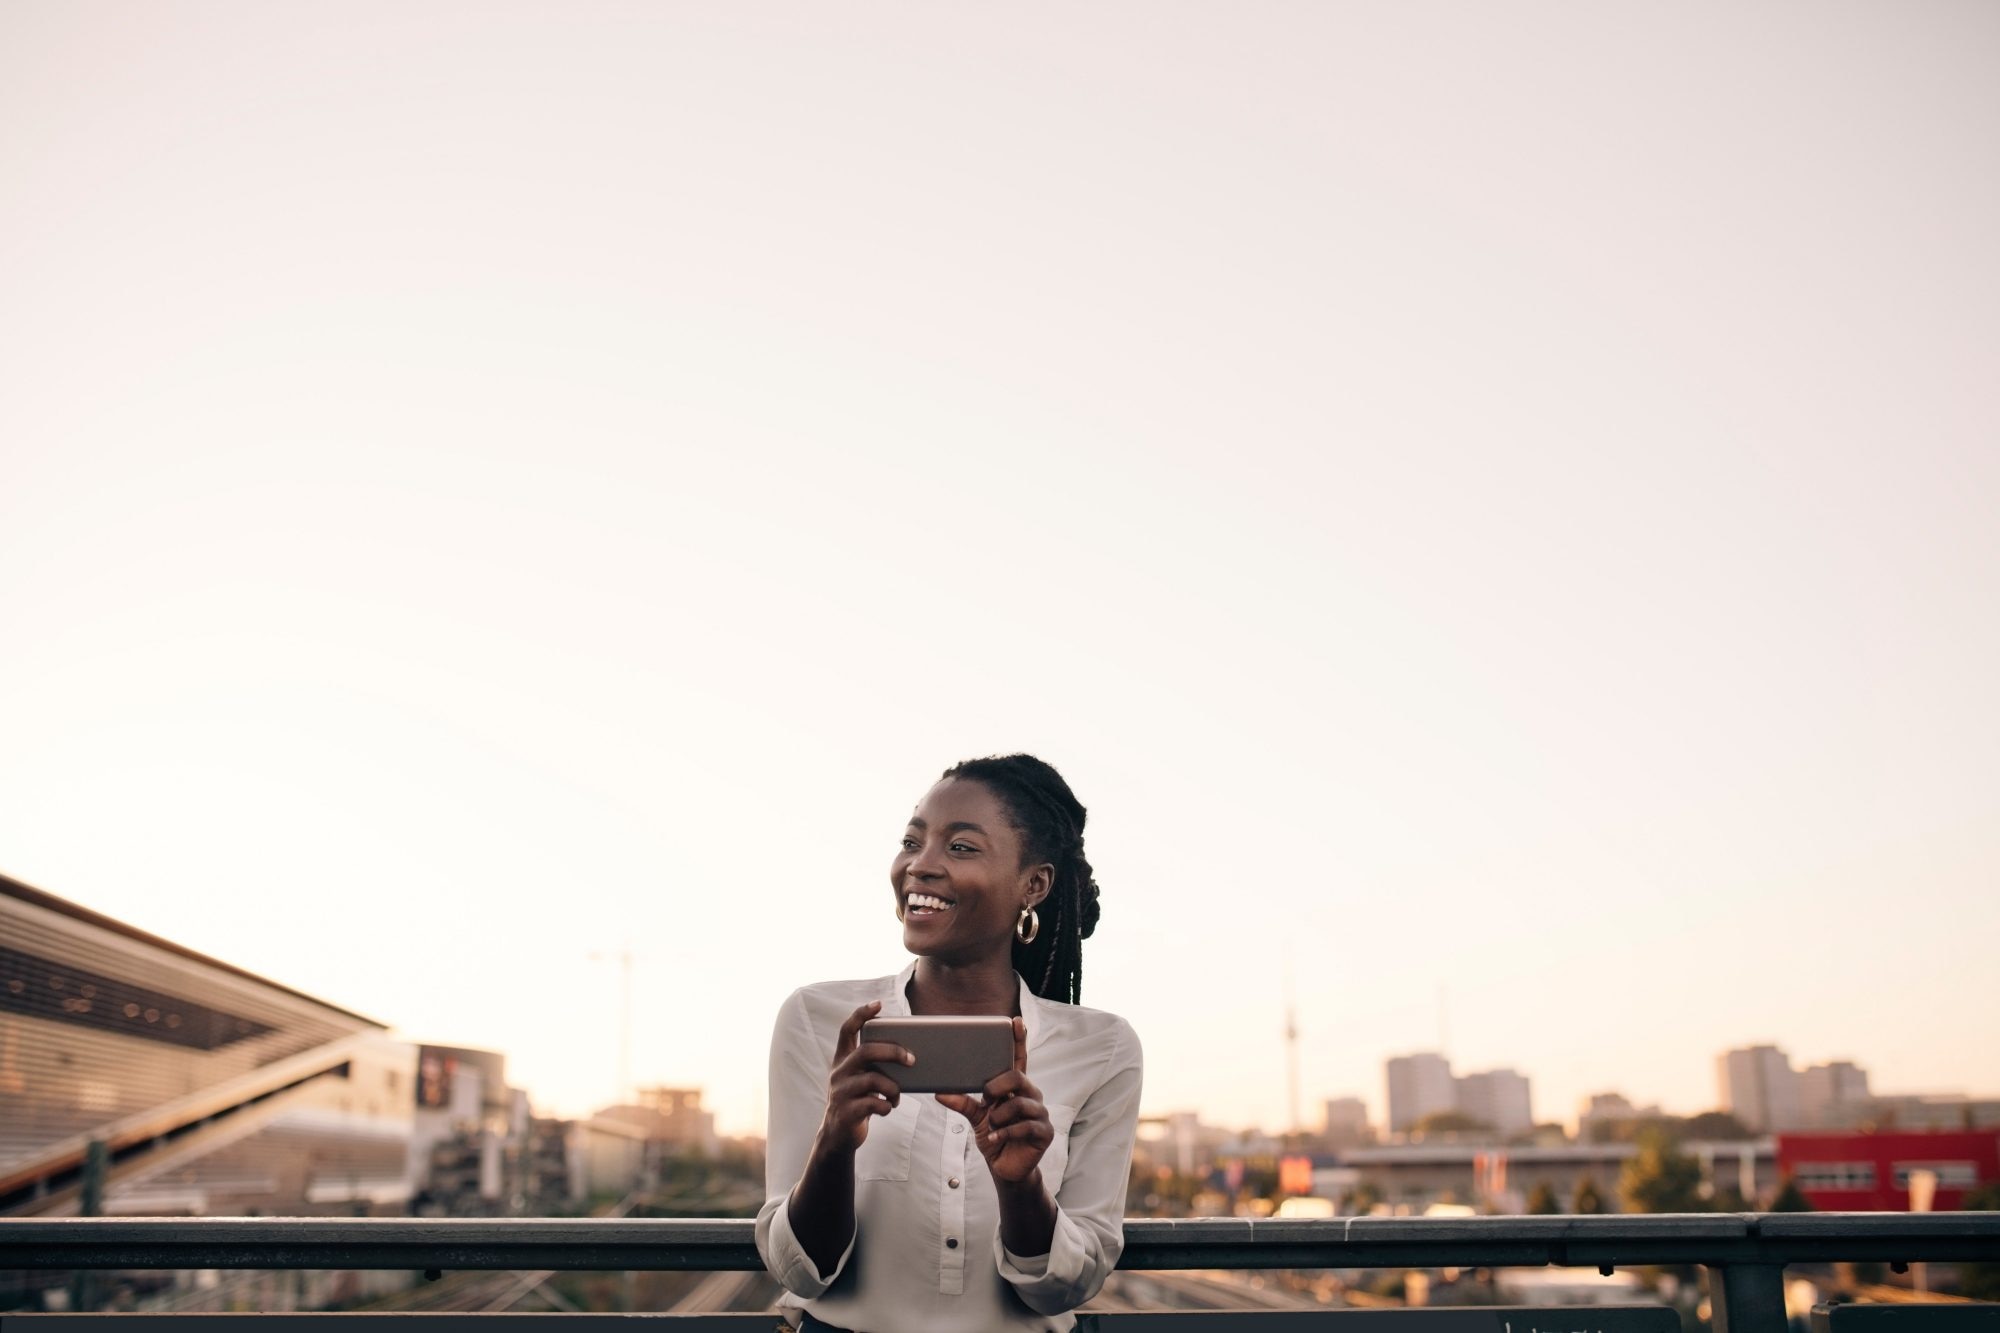 Young woman laughing and holding phone at dusk